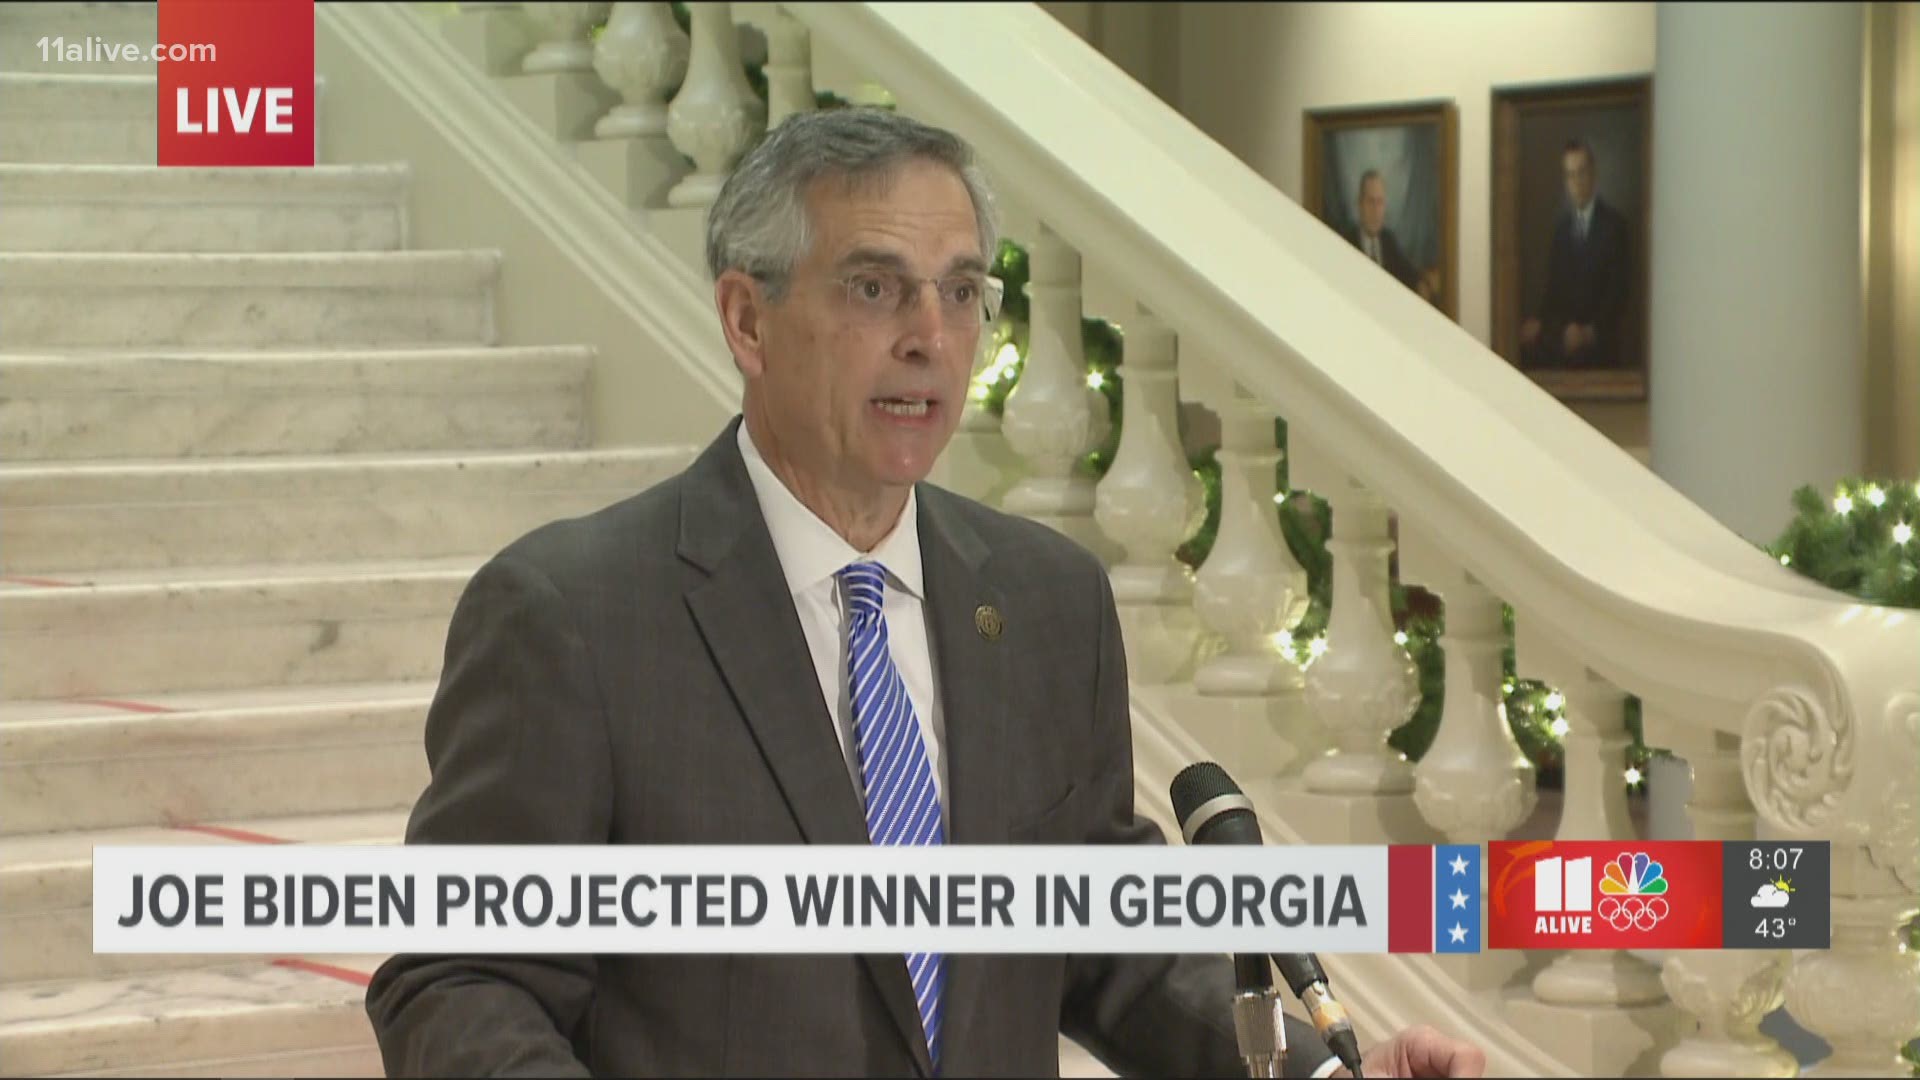 Friday morning, Secretary Brad Raffensperger held a press conference to share his confidence in the election results and propose changes to Georgia's election laws.